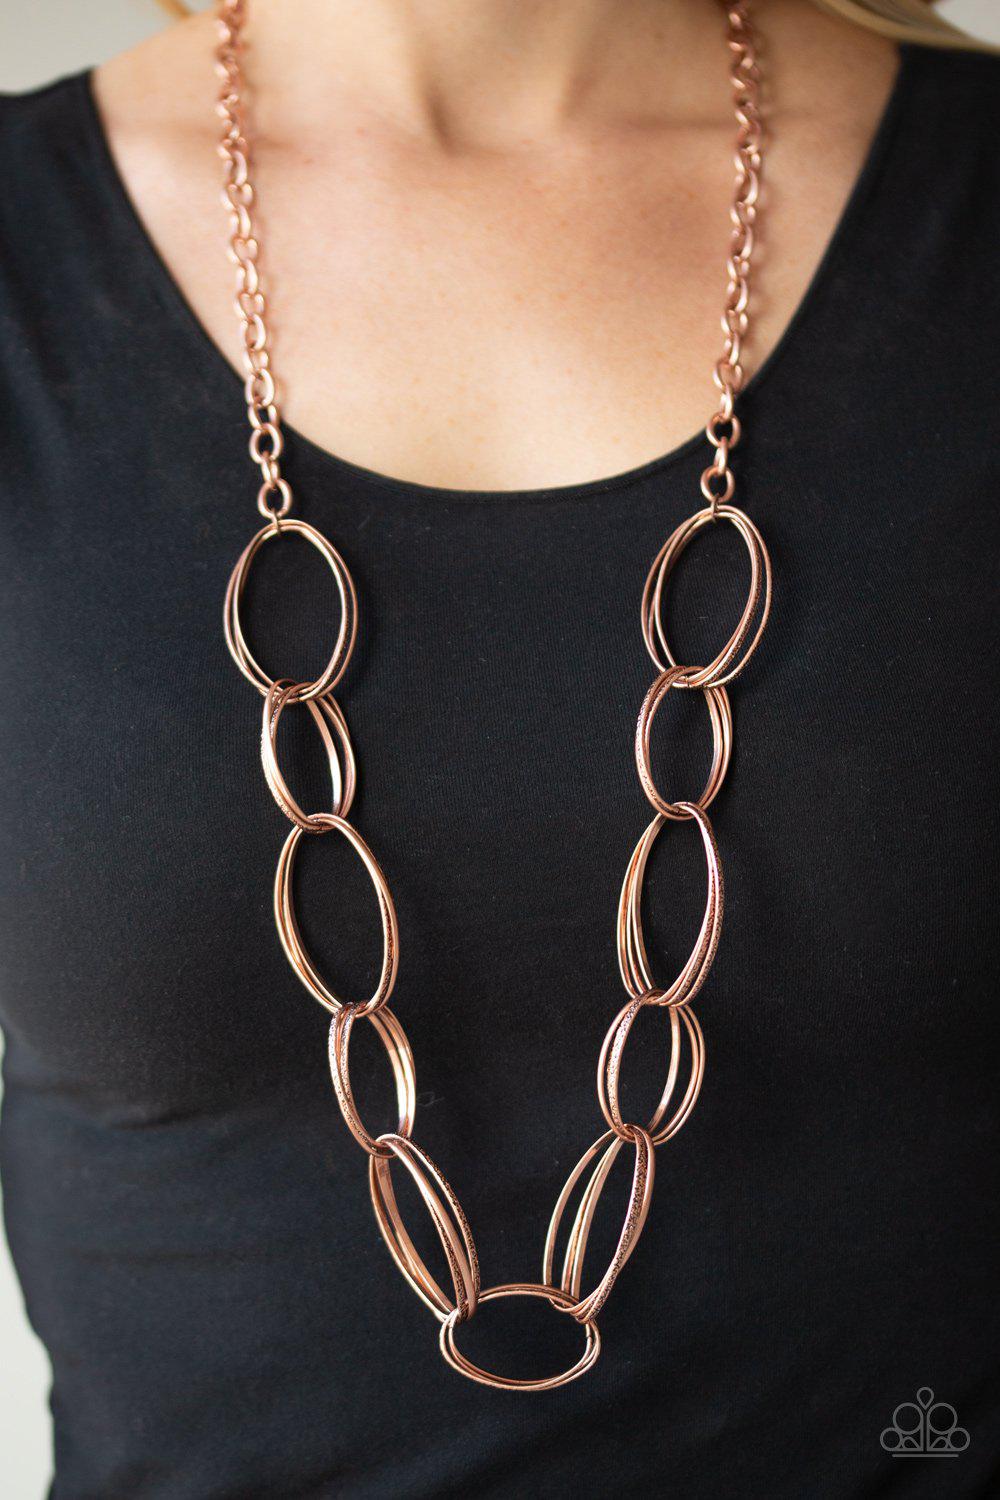 Ring Bling Copper Necklace - Paparazzi Accessories- model - CarasShop.com - $5 Jewelry by Cara Jewels